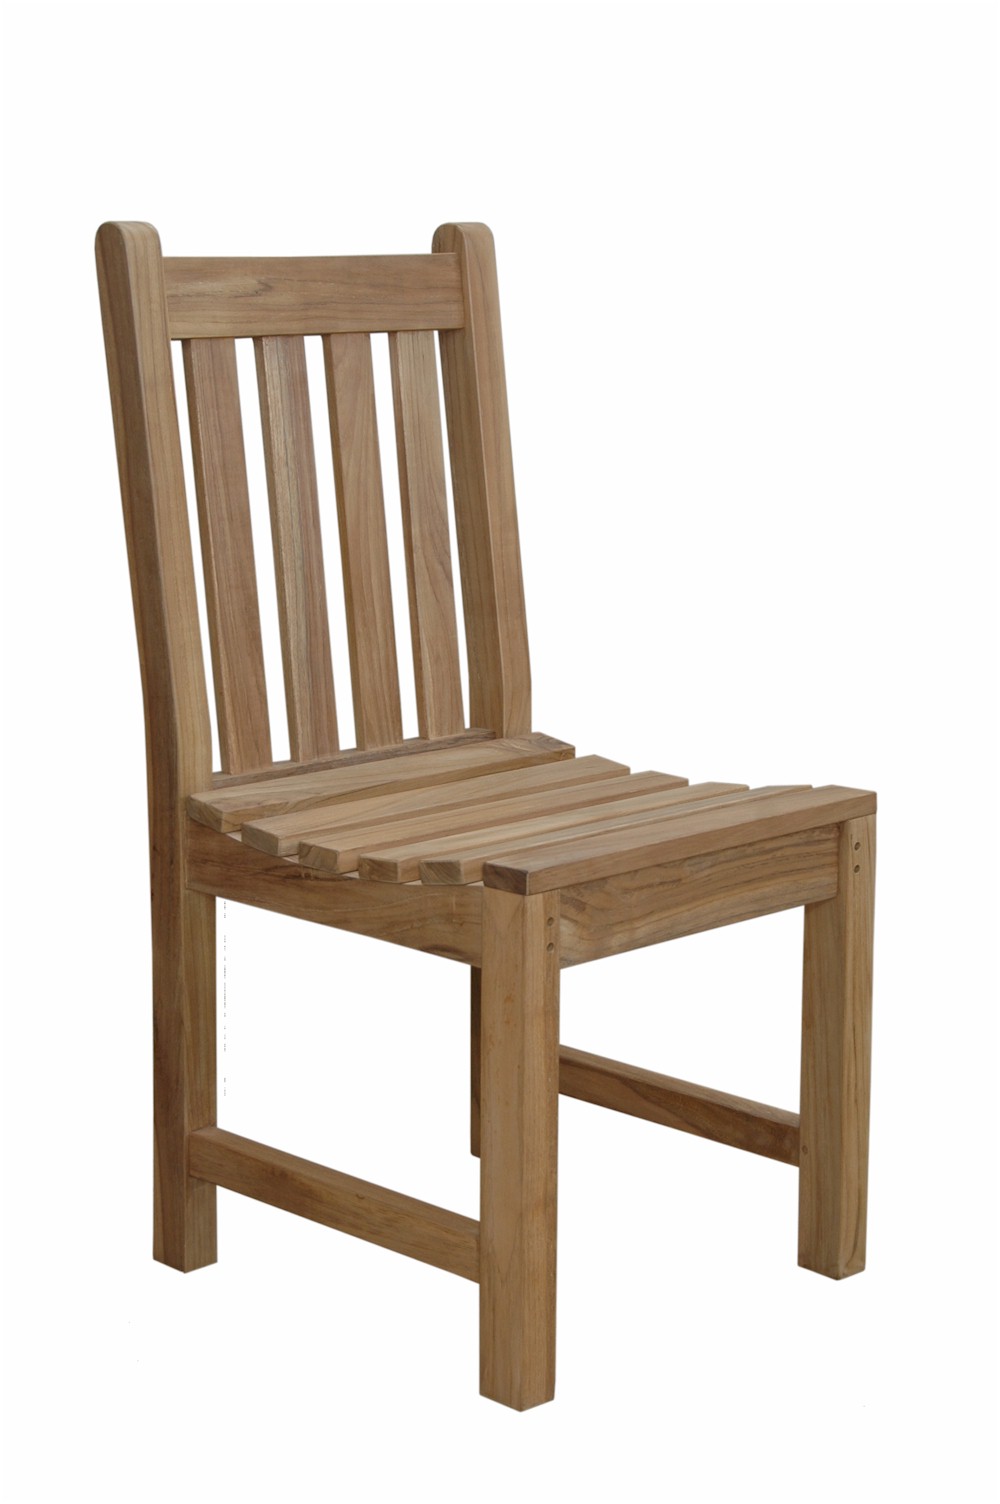 Anderson Teak Braxton Dining Chair - image 2 of 2